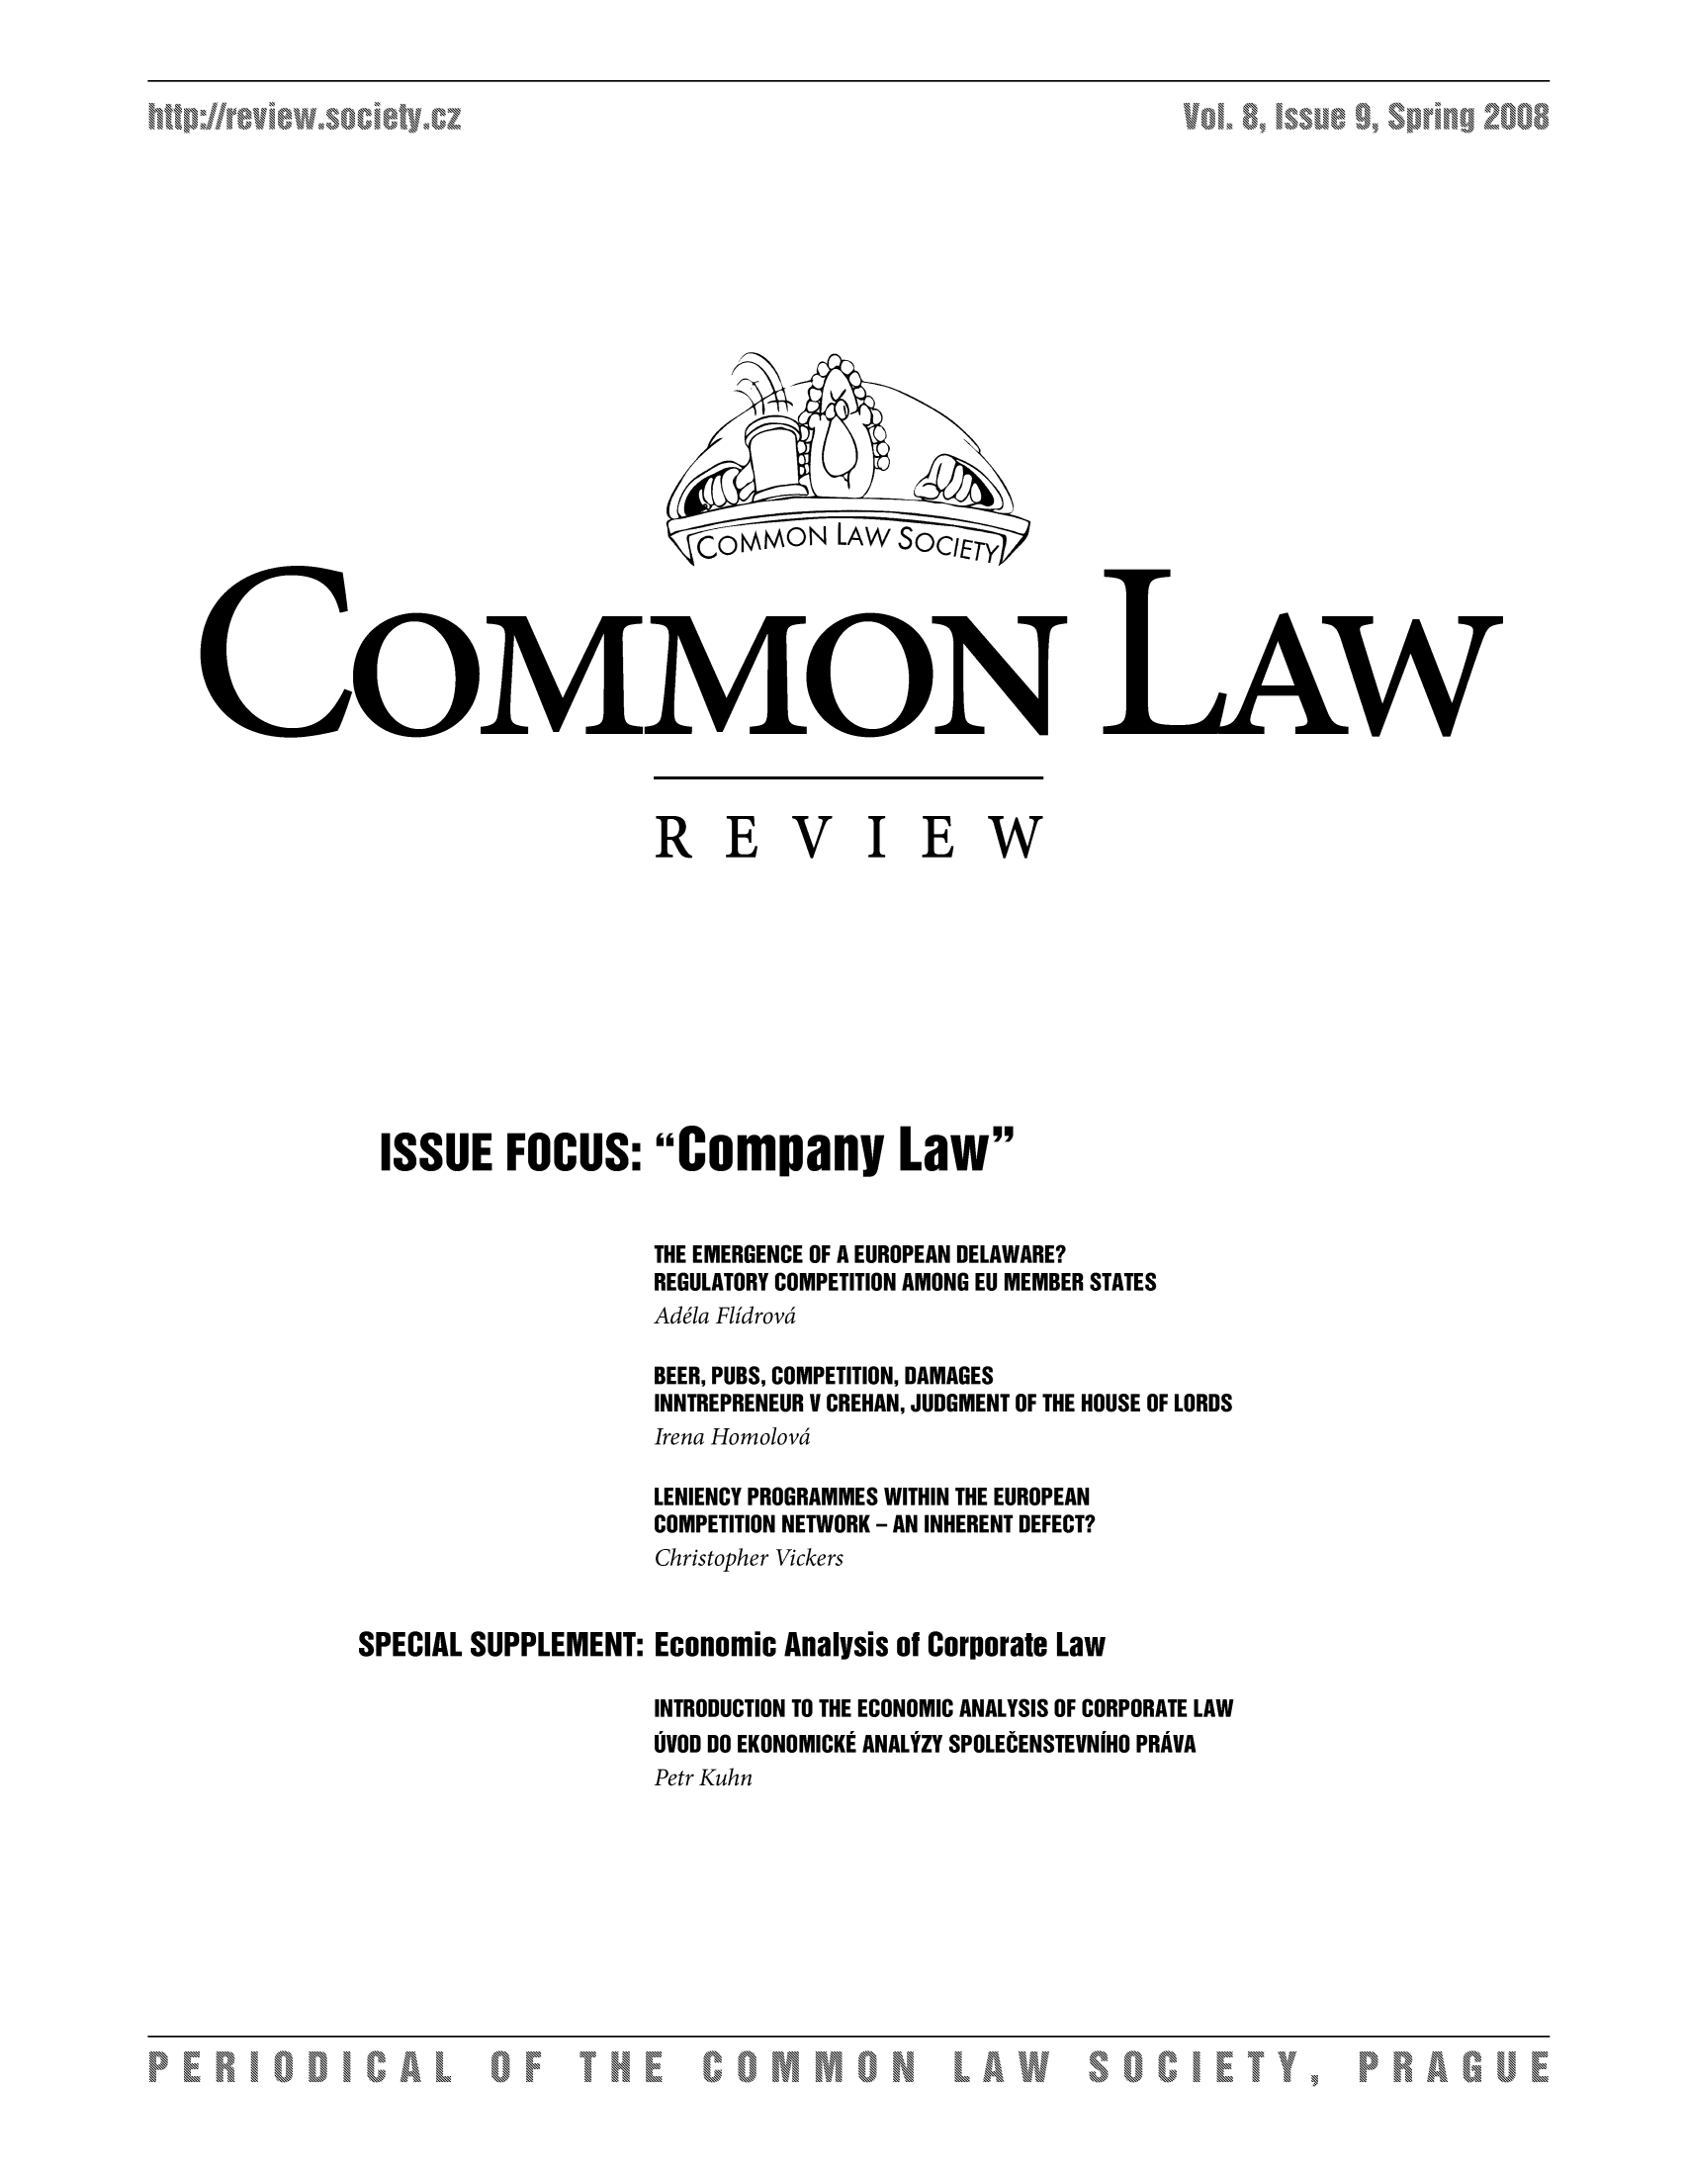 handle is hein.journals/comnlrevi9 and id is 1 raw text is: REVIEWISSUE FOCUS: Company LawTHE EMERGENCE OF A EUROPEAN DELAWARE?REGULATORY COMPETITION AMONG EU MEMBER STATESAdela FlidrovdBEER, PUBS, COMPETITION, DAMAGESINNTREPRENEUR V CREHAN, JUDGMENT OF THE HOUSE OF LORDSIrena HomolovdLENIENCY PROGRAMMES WITHIN THE EUROPEANCOMPETITION NETWORK - AN INHERENT DEFECT?Christopher VickersSPECIAL SUPPLEMENT: Economic Analysis of Corporate LawINTRODUCTION TO THE ECONOMIC ANALYSIS OF CORPORATE LAWUVOD DO EKONOMICKE ANALYZY SPOLECENSTEVNIHO PRAVAPetr Kuhn